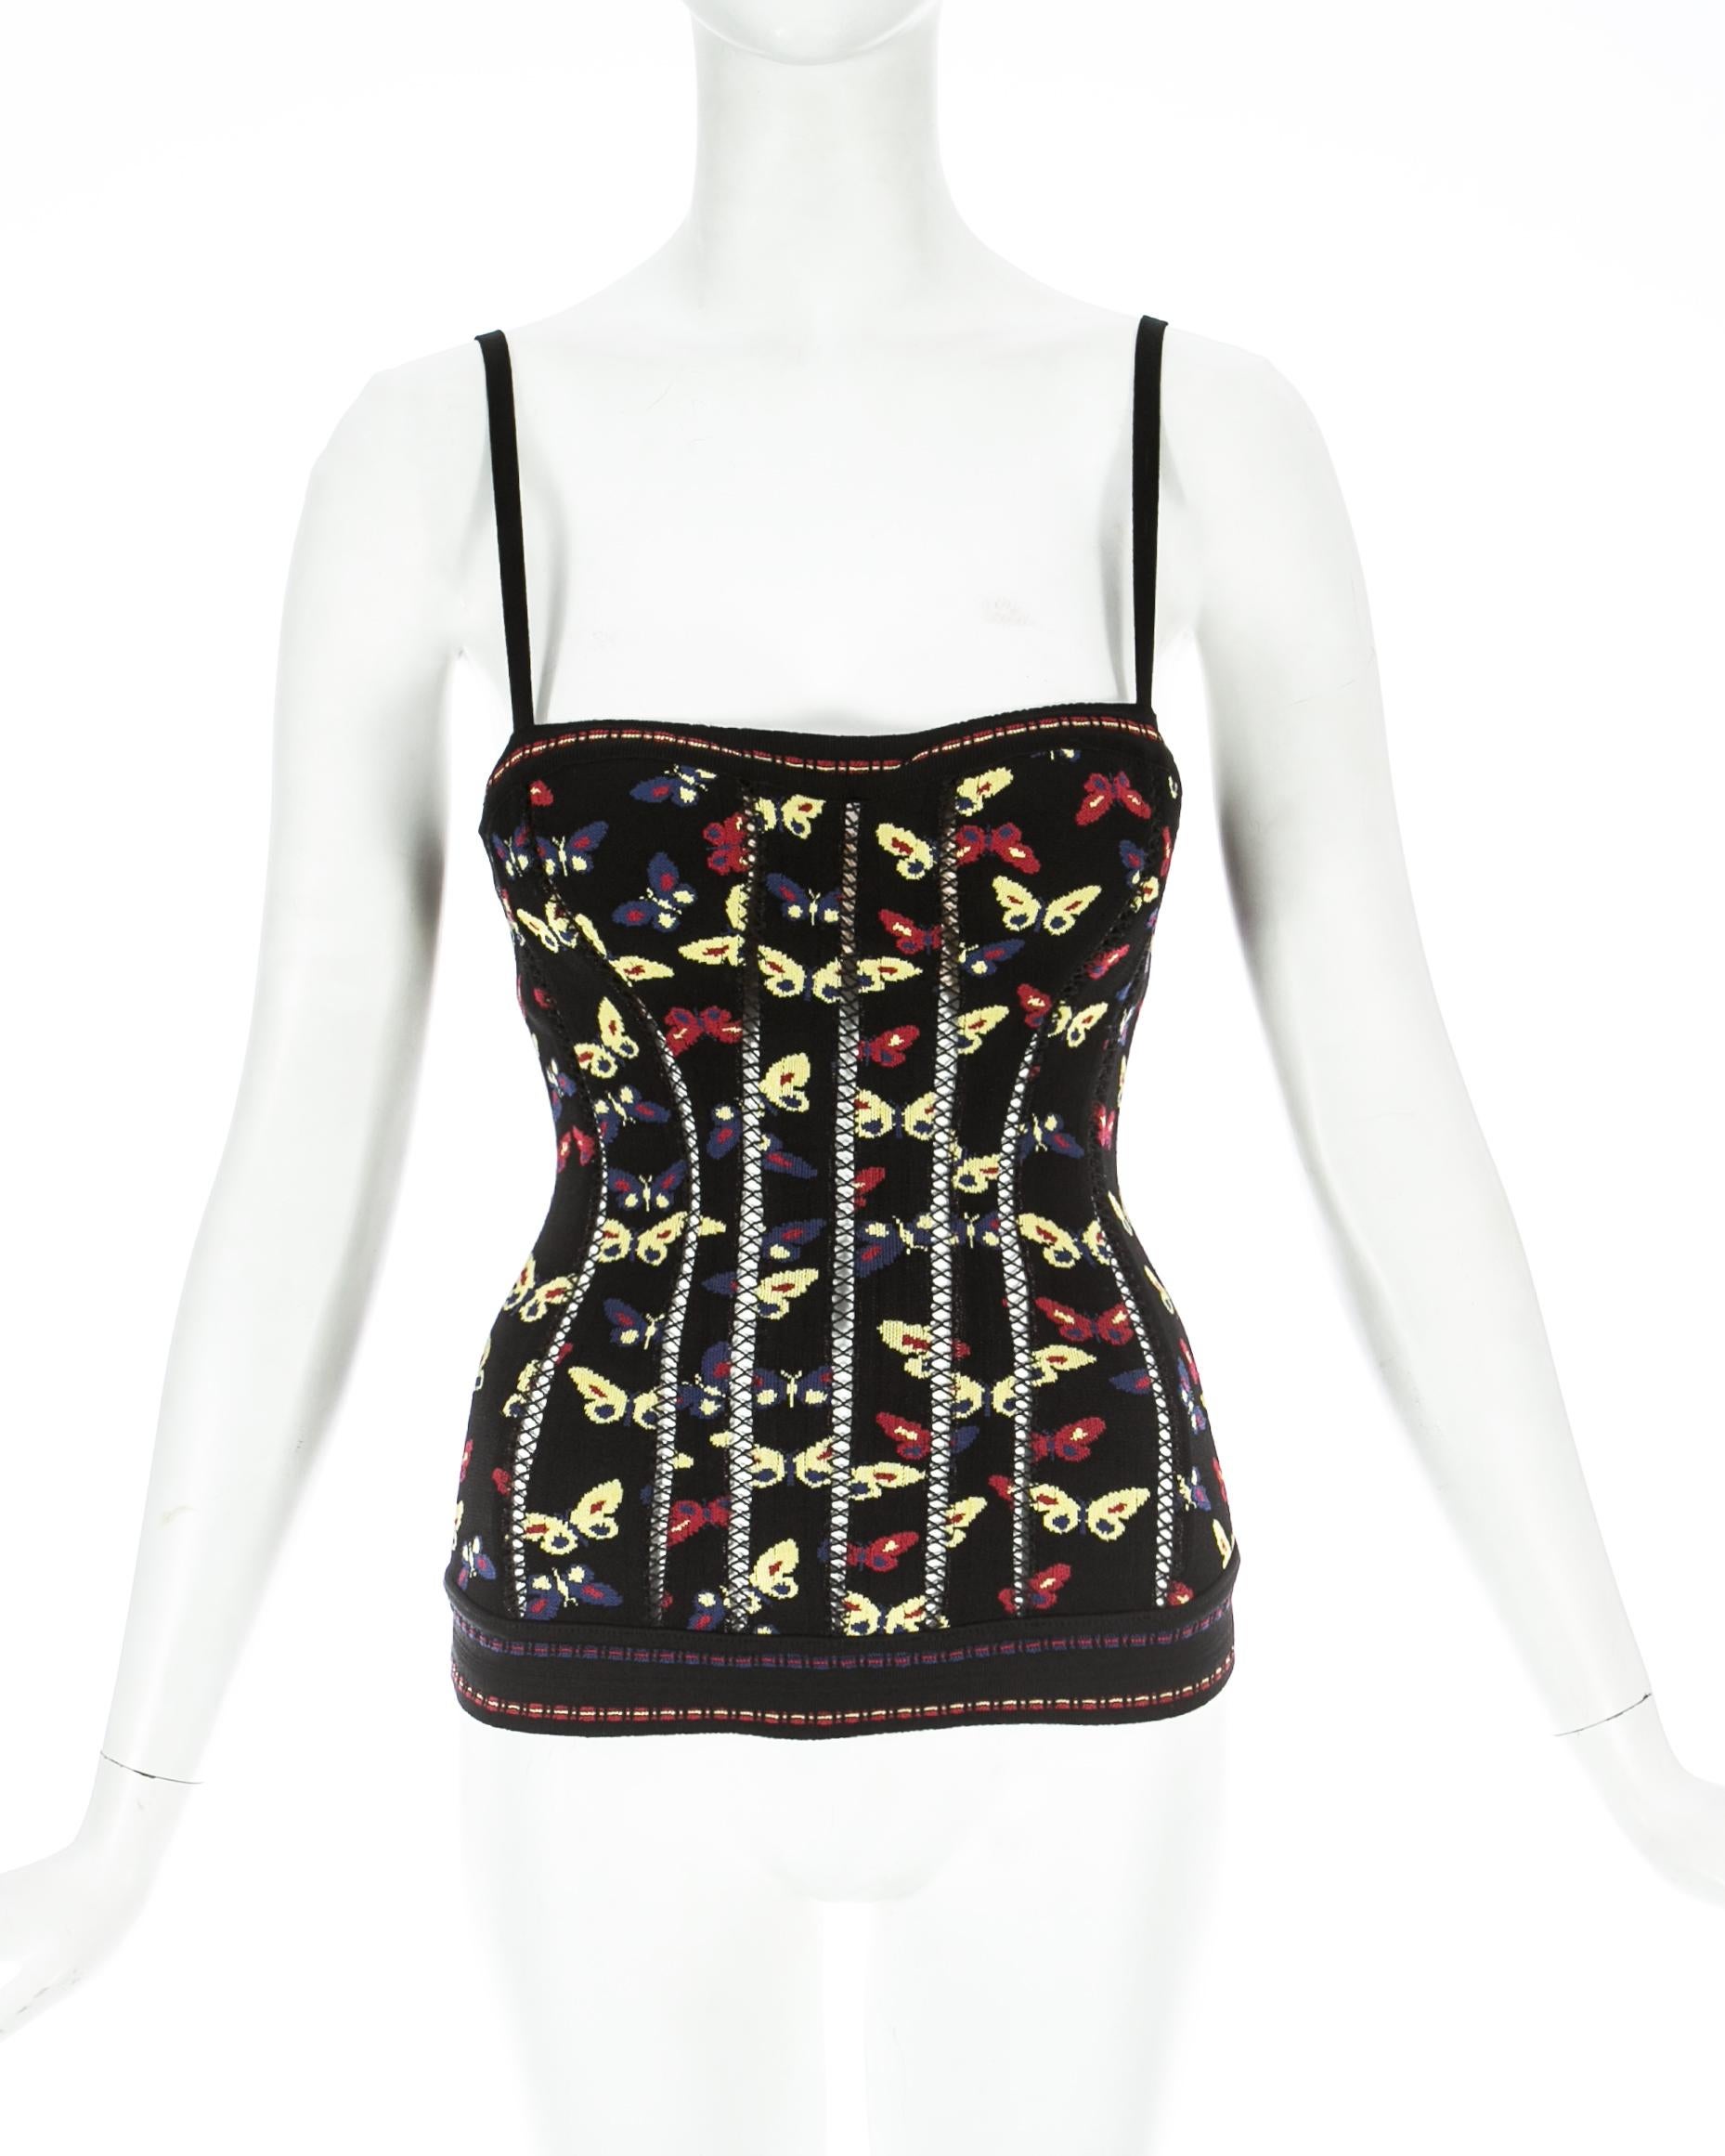 Azzedine Alaia black spandex knit corset with built in bra and butterfly print

Autumn-Winter 1991